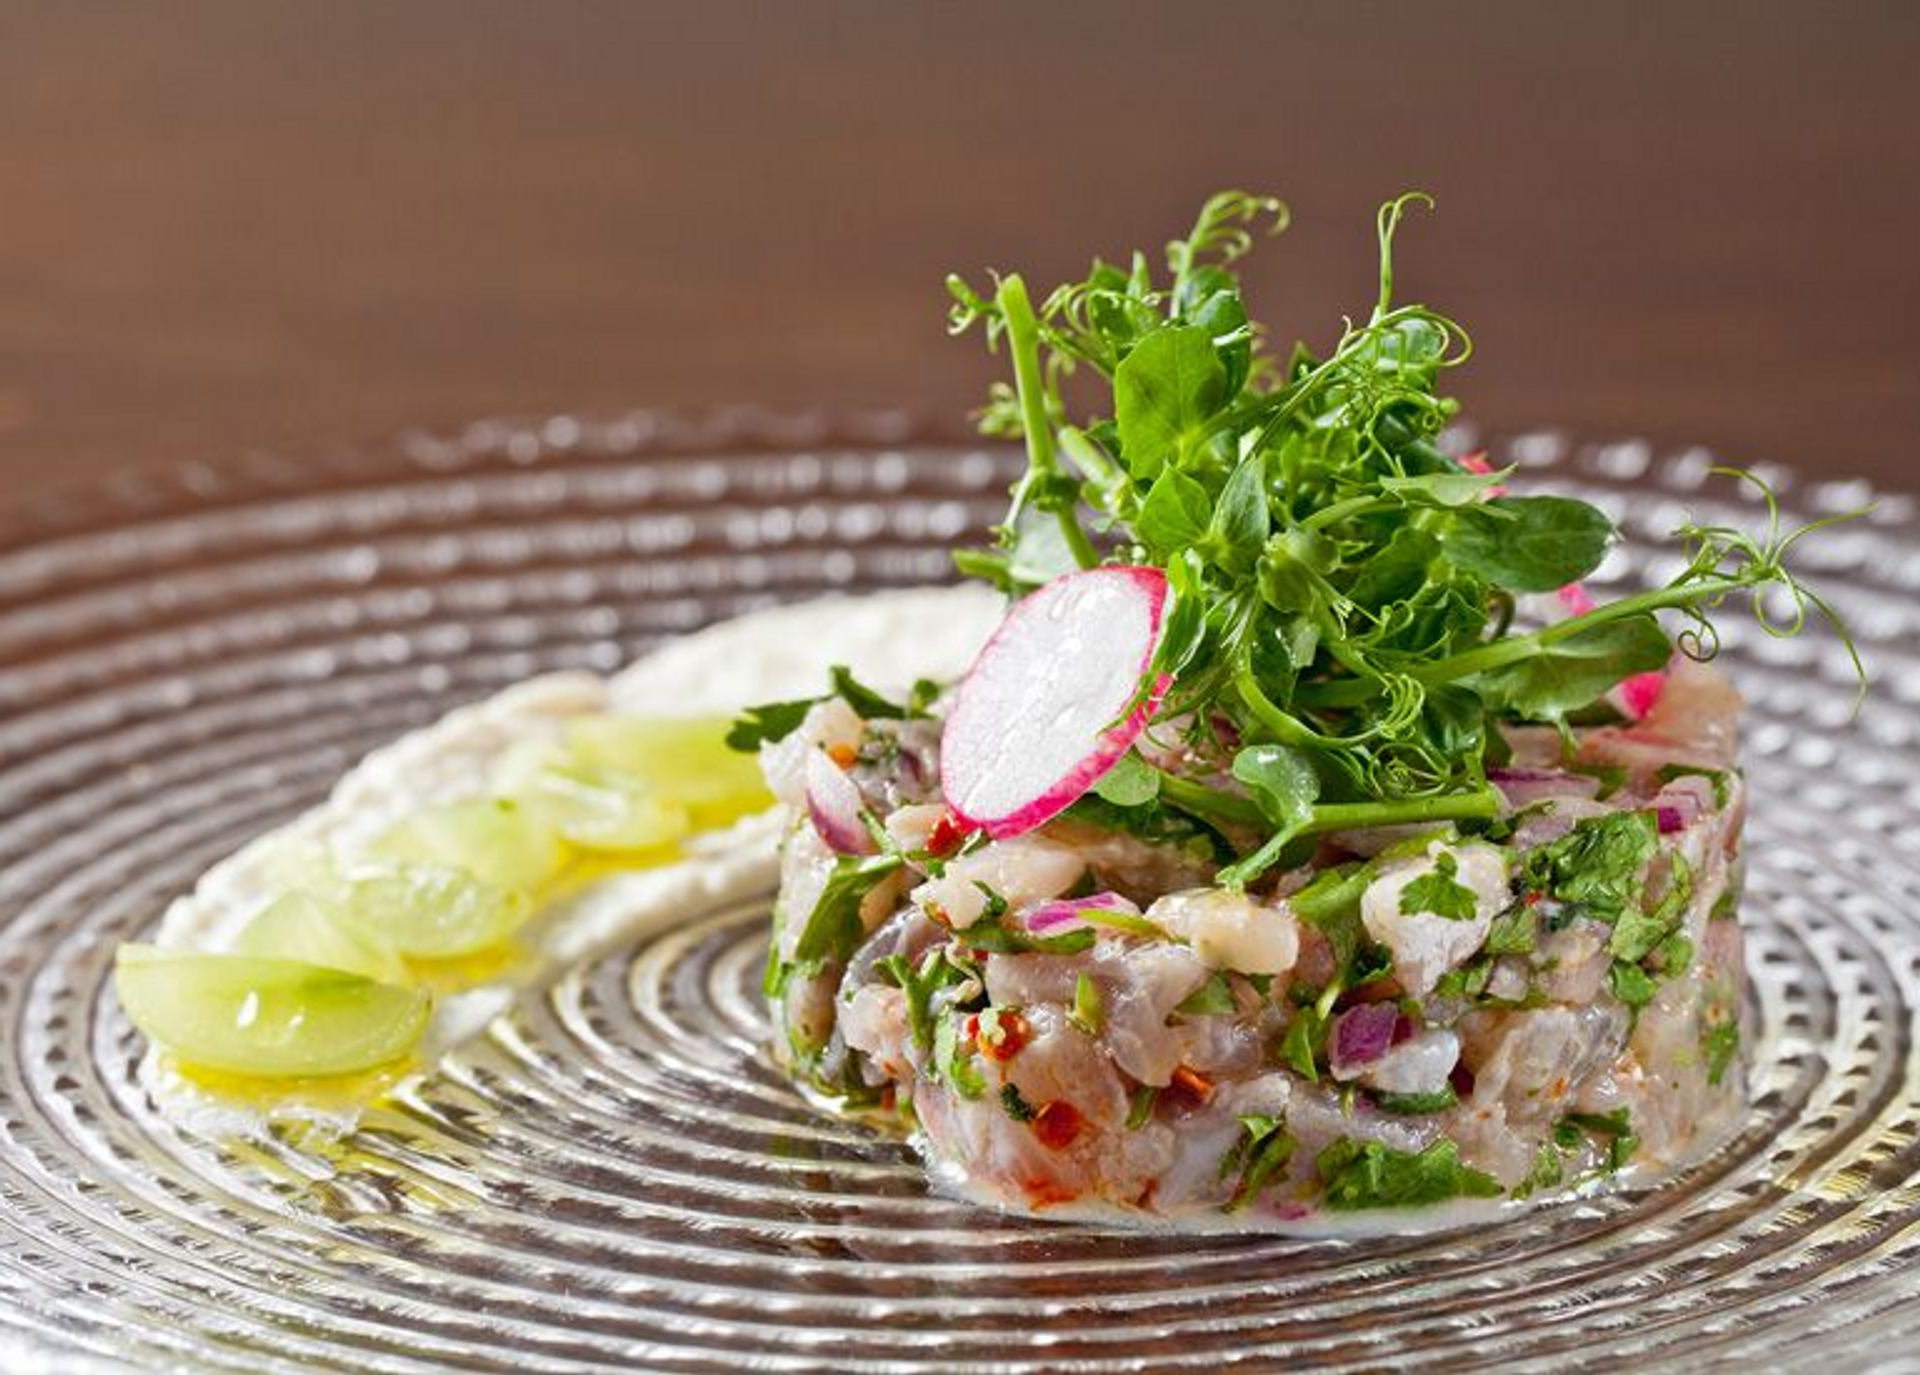 Marinated fresh anchovies on pepper salad, an Andalusian recipe from chef Avi Biton of the Tel Aviv restaurant Adora

